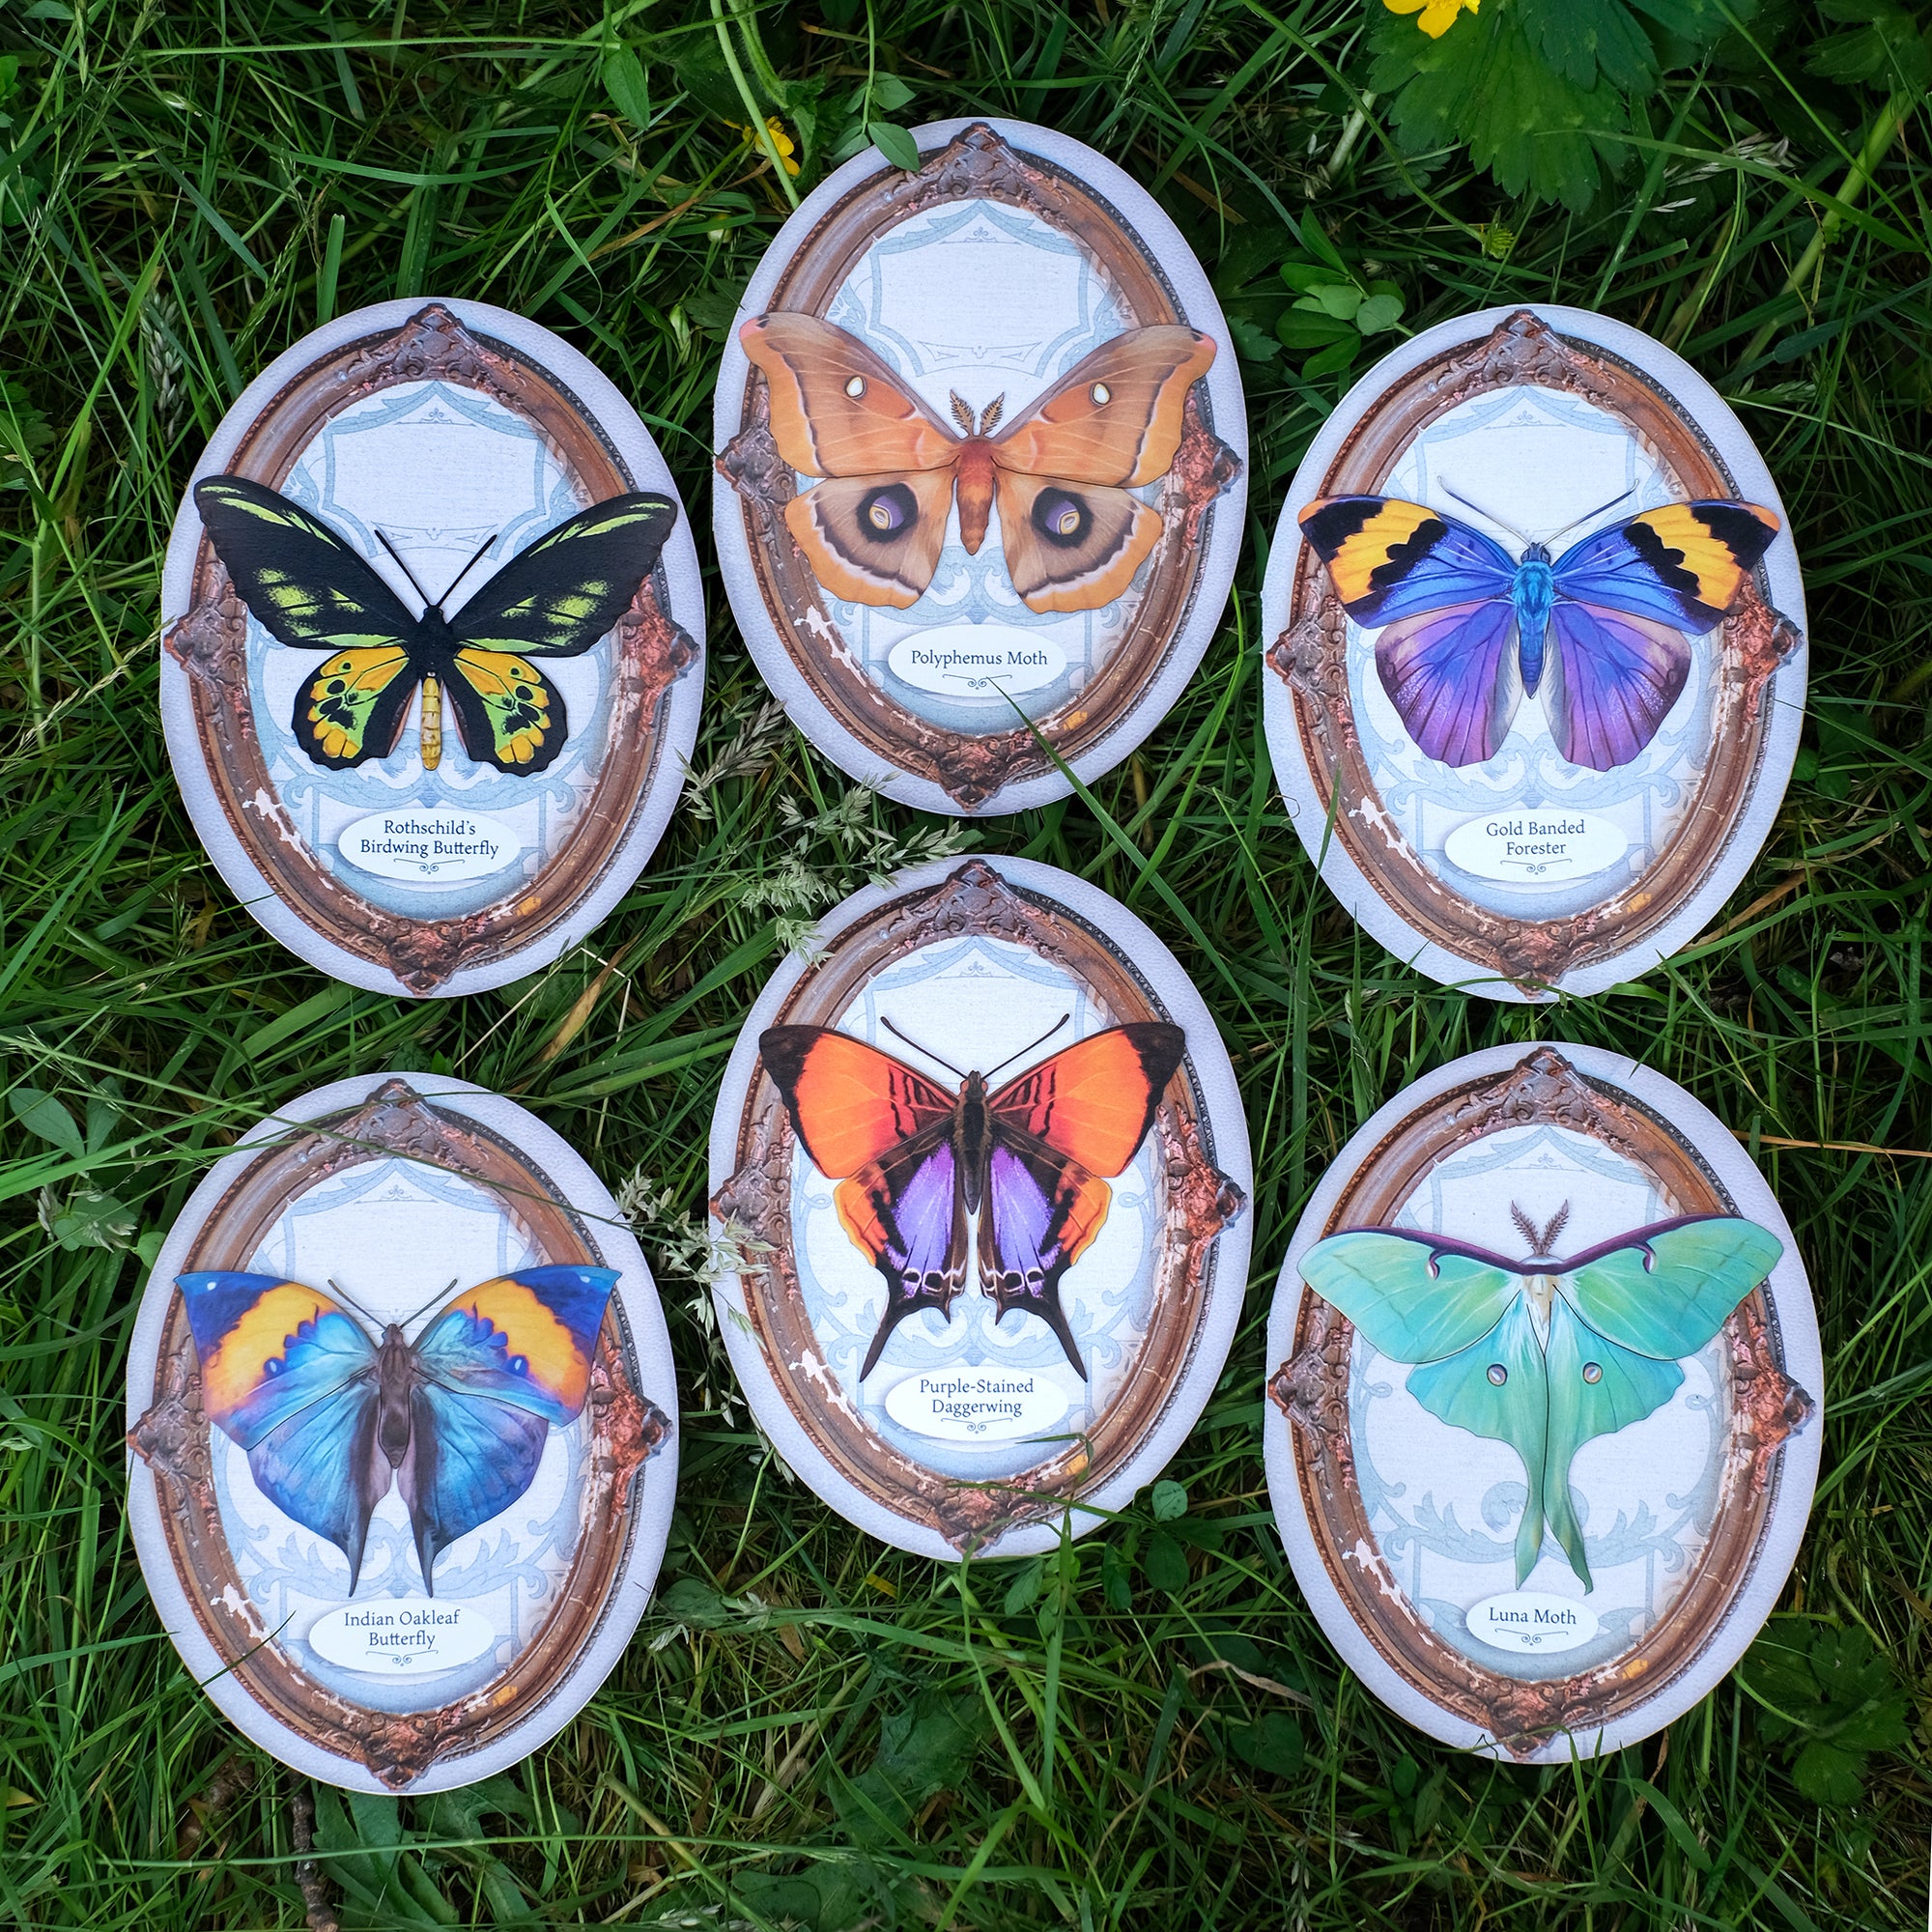 Indian Oakleaf Butterfly Oval Greeting Card - Set of 4 - Reseller Wholesale